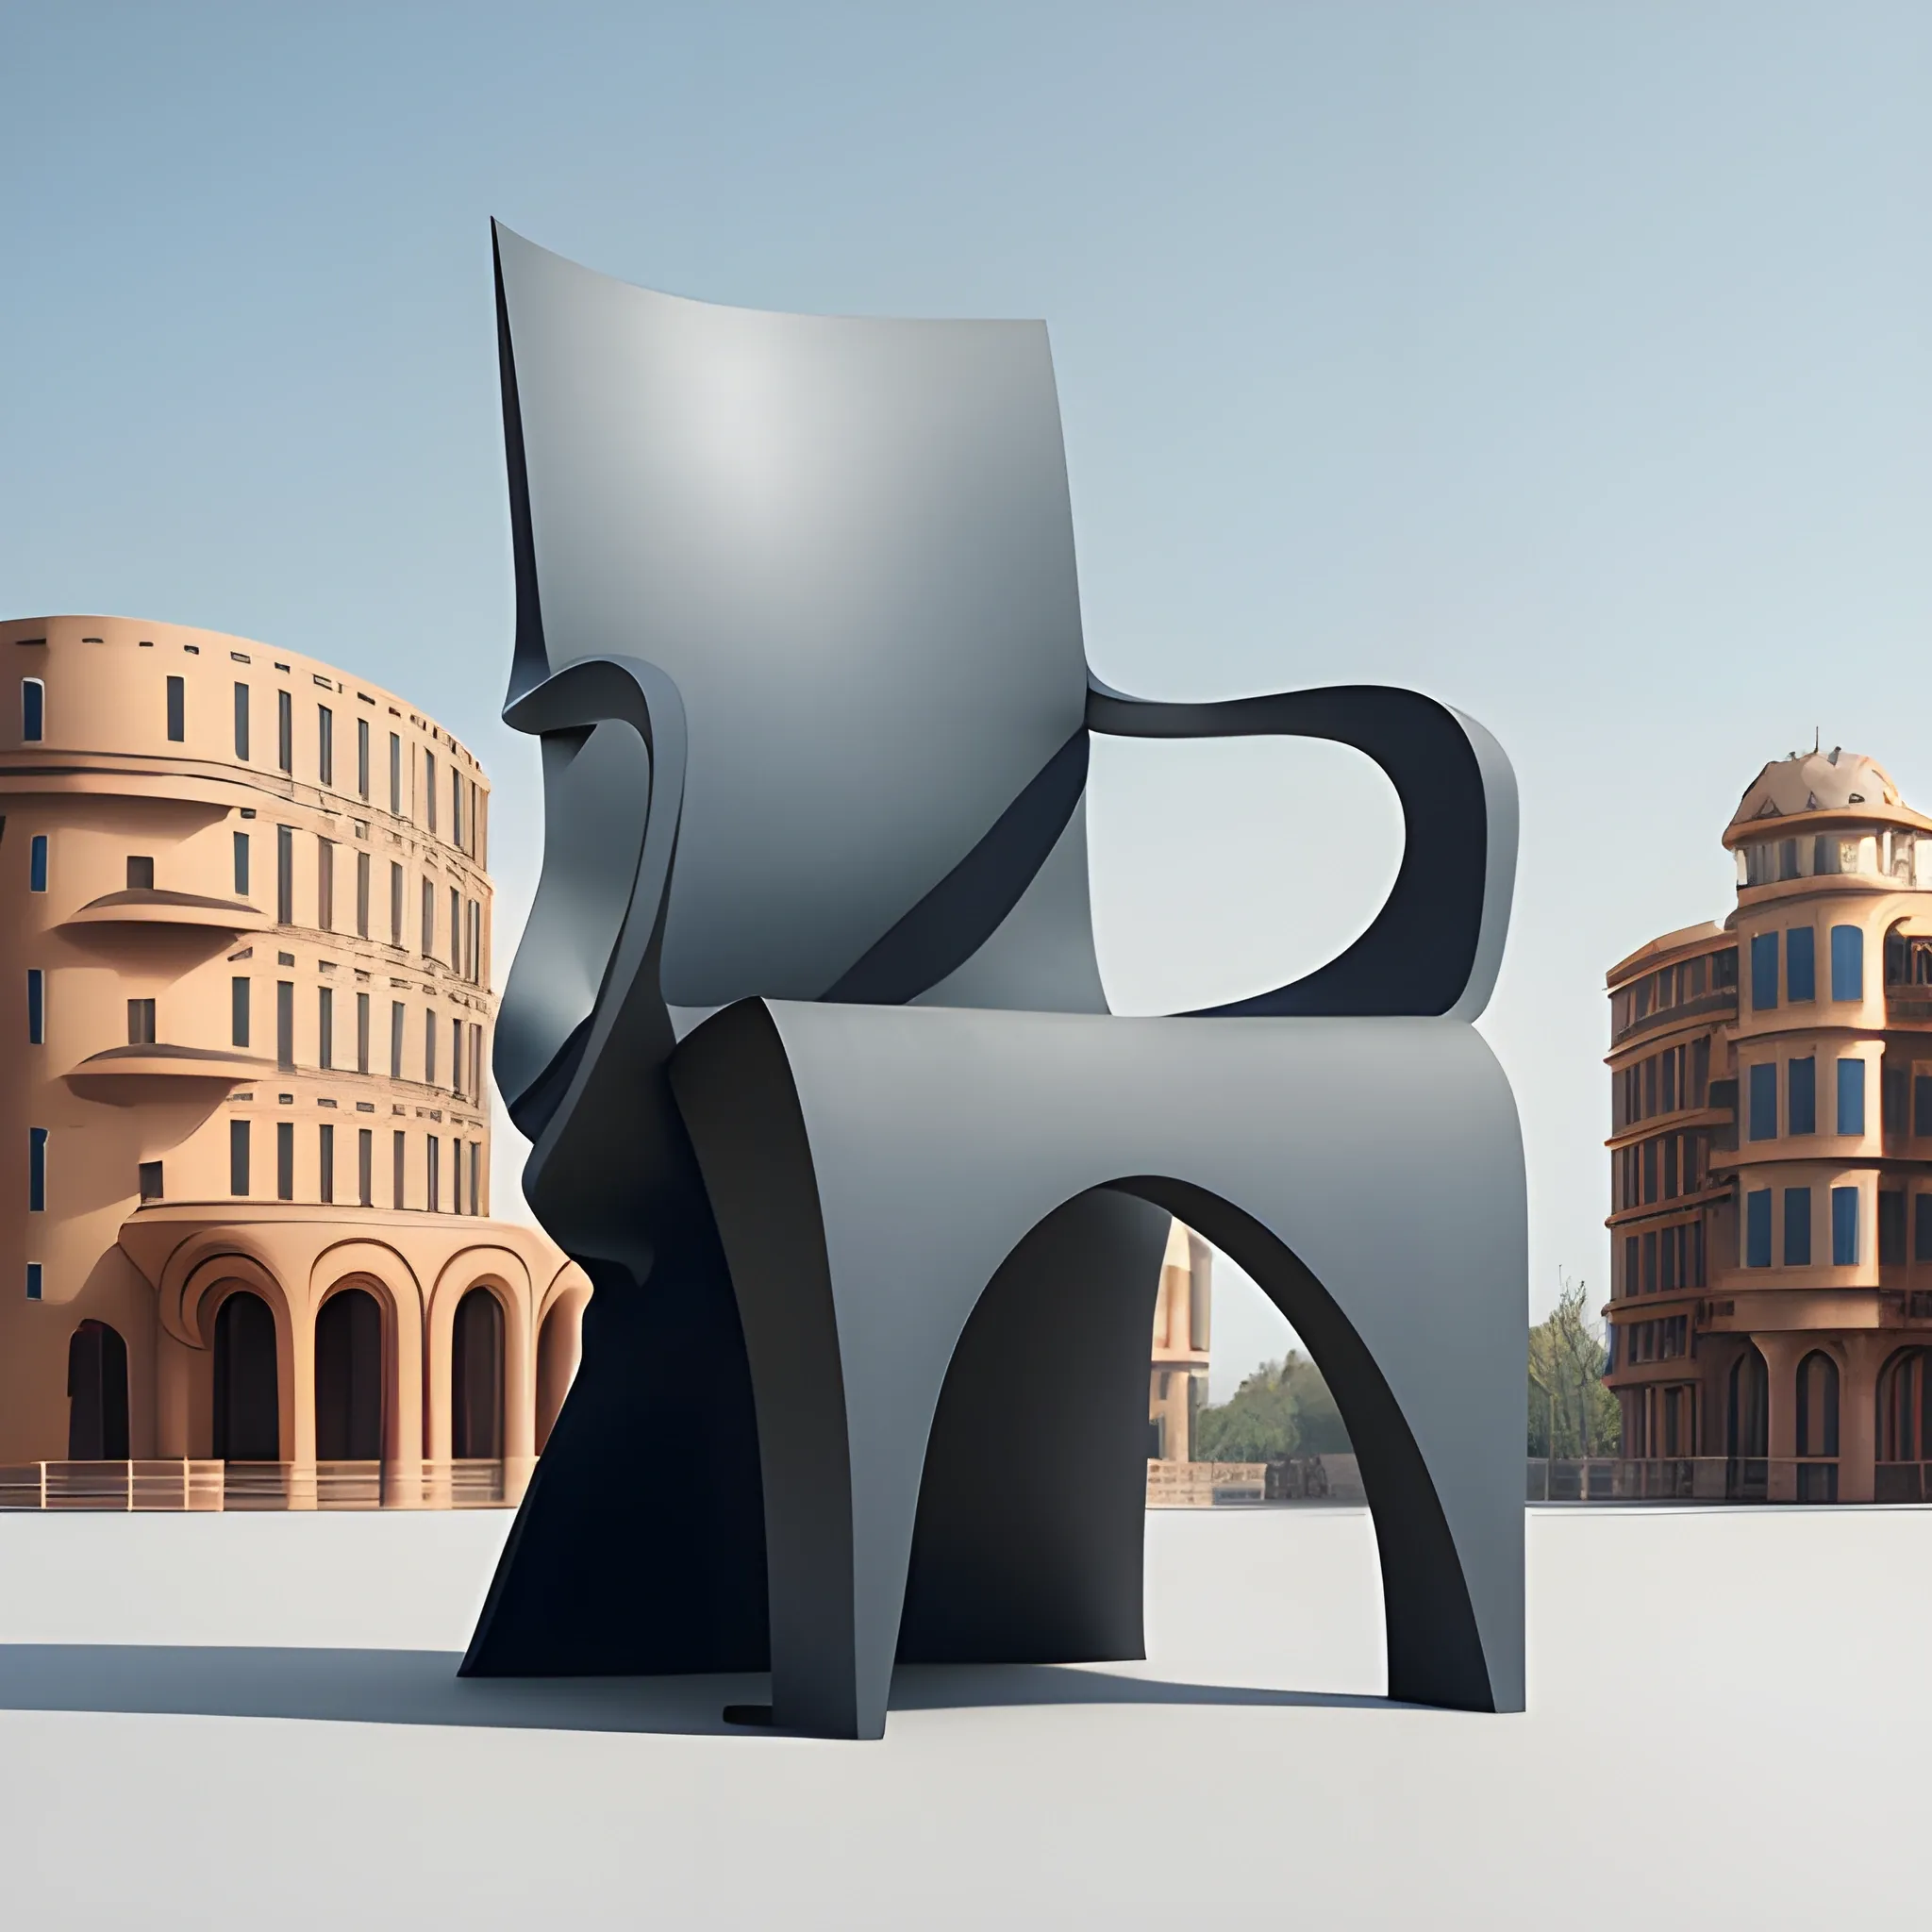 Create a monumental modern sculptured italian folk and chair feature with gown, toga concept , in  Frank Gehry style, Bronce material surface and brick base, asymetric composition, simple design as Bahaus style, minimal, geometric simplicity,  big locomotion expression,  blue sky background, pretty detailed HD render, classic base, fountain, 3D